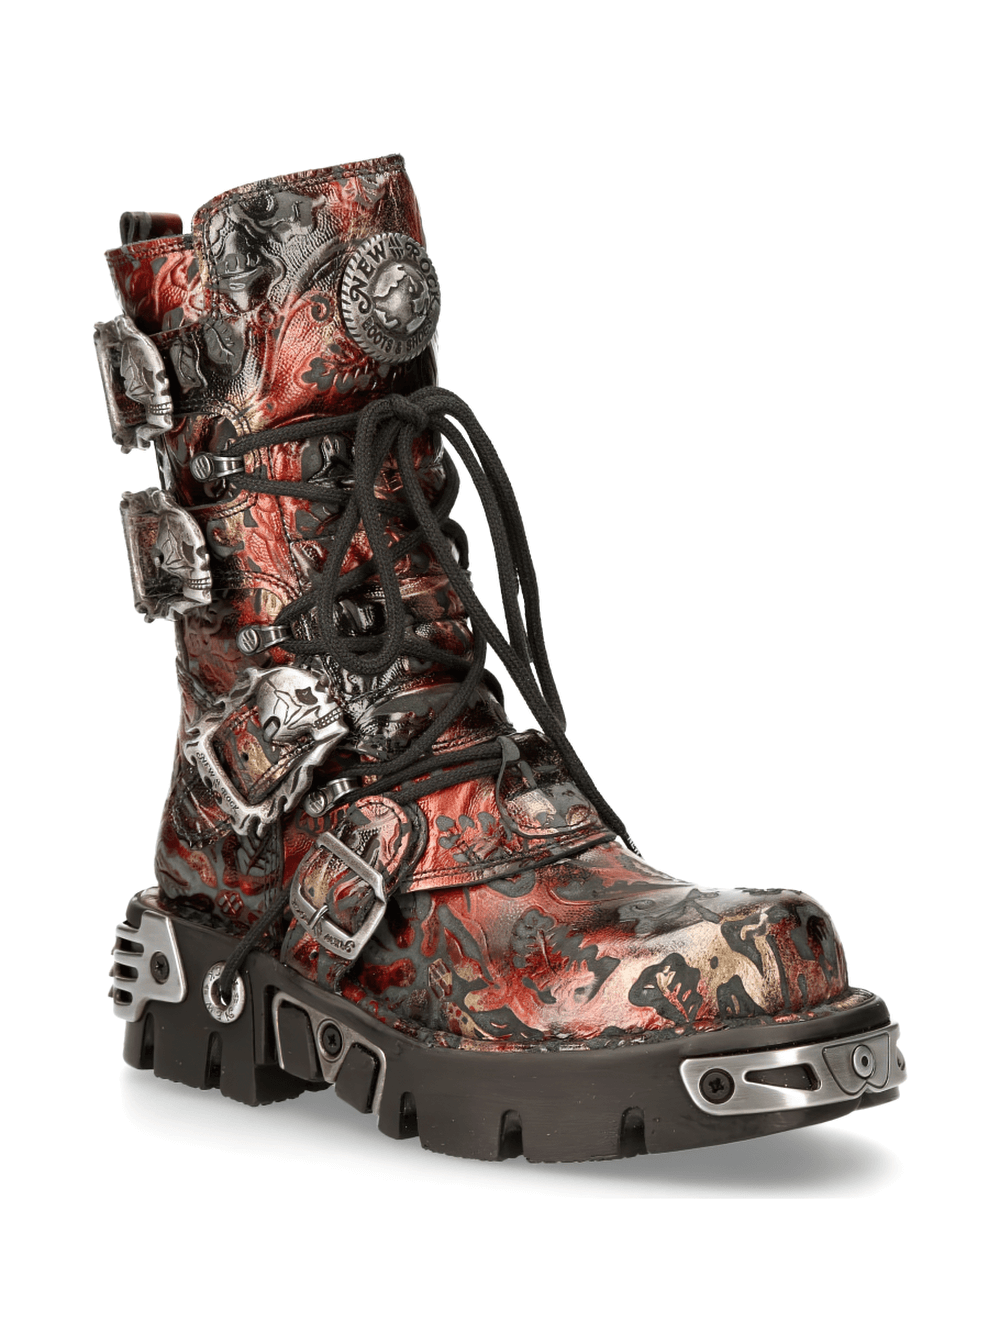 NEW ROCK Gothic Metallic Red Buckle Boots Unisex